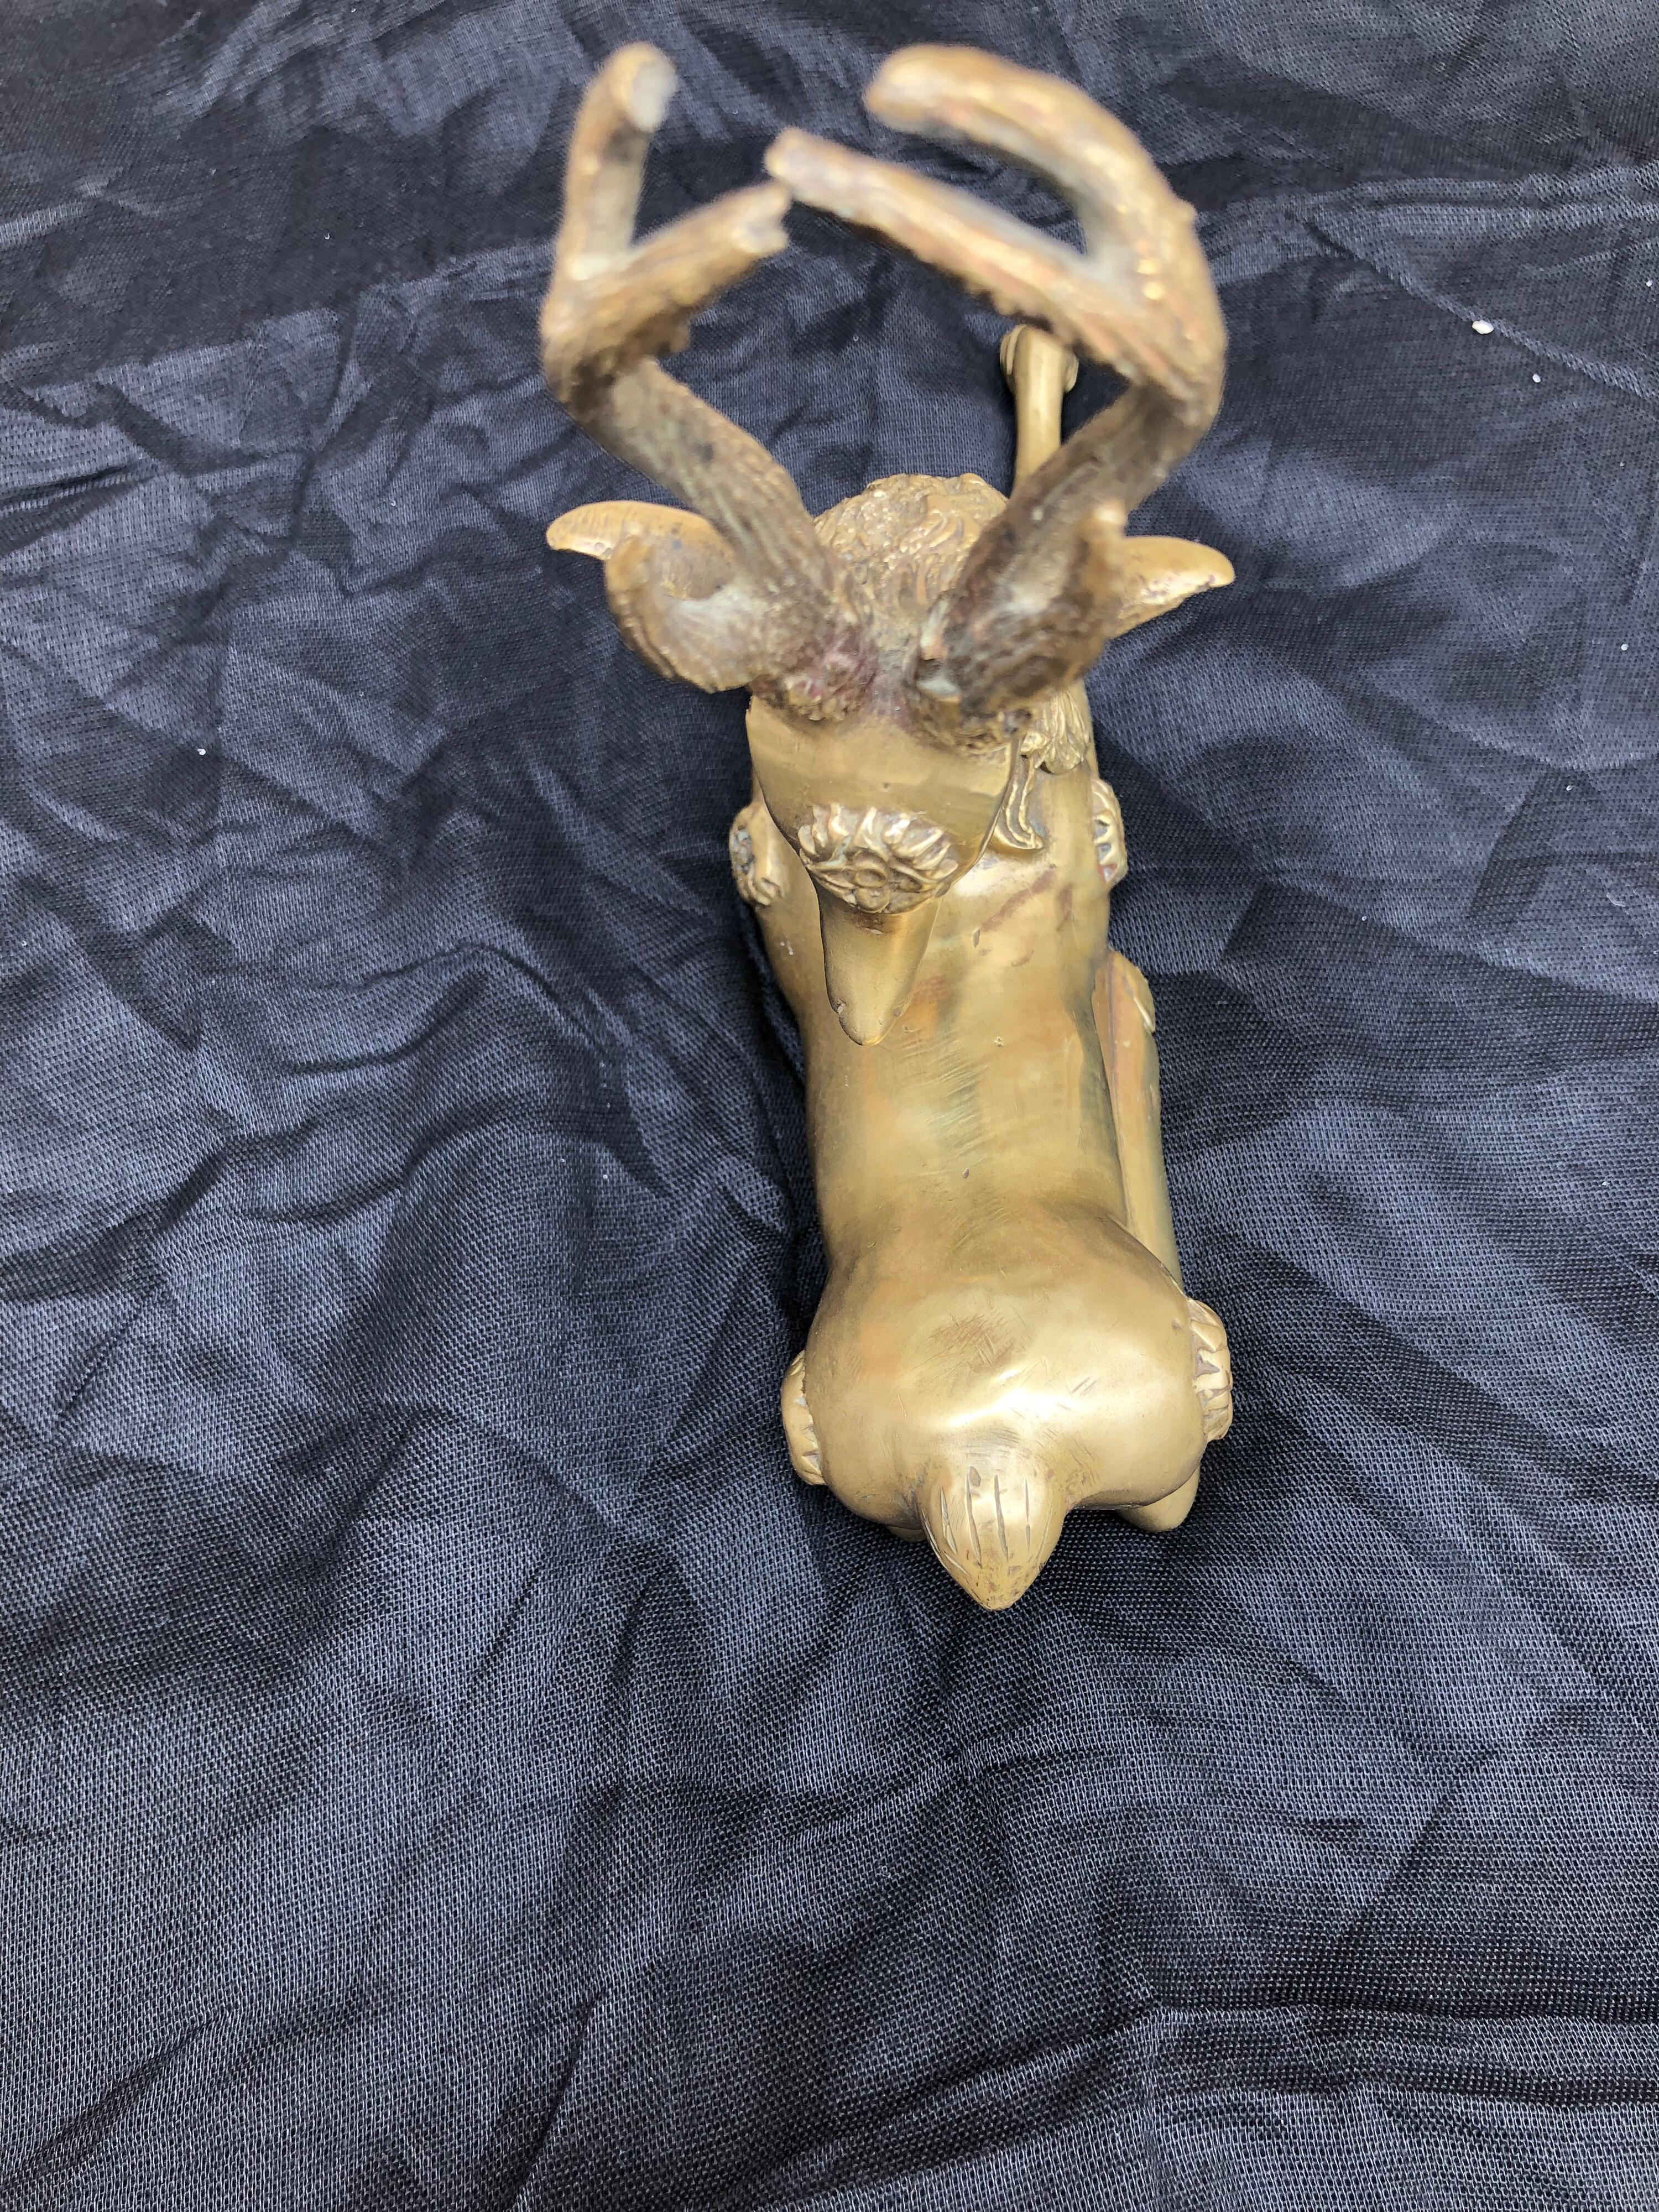 Antique Moroccan Brass Gazelle, Early 1900s Embossed African Animal Sculpture In Good Condition For Sale In Vineyard Haven, MA